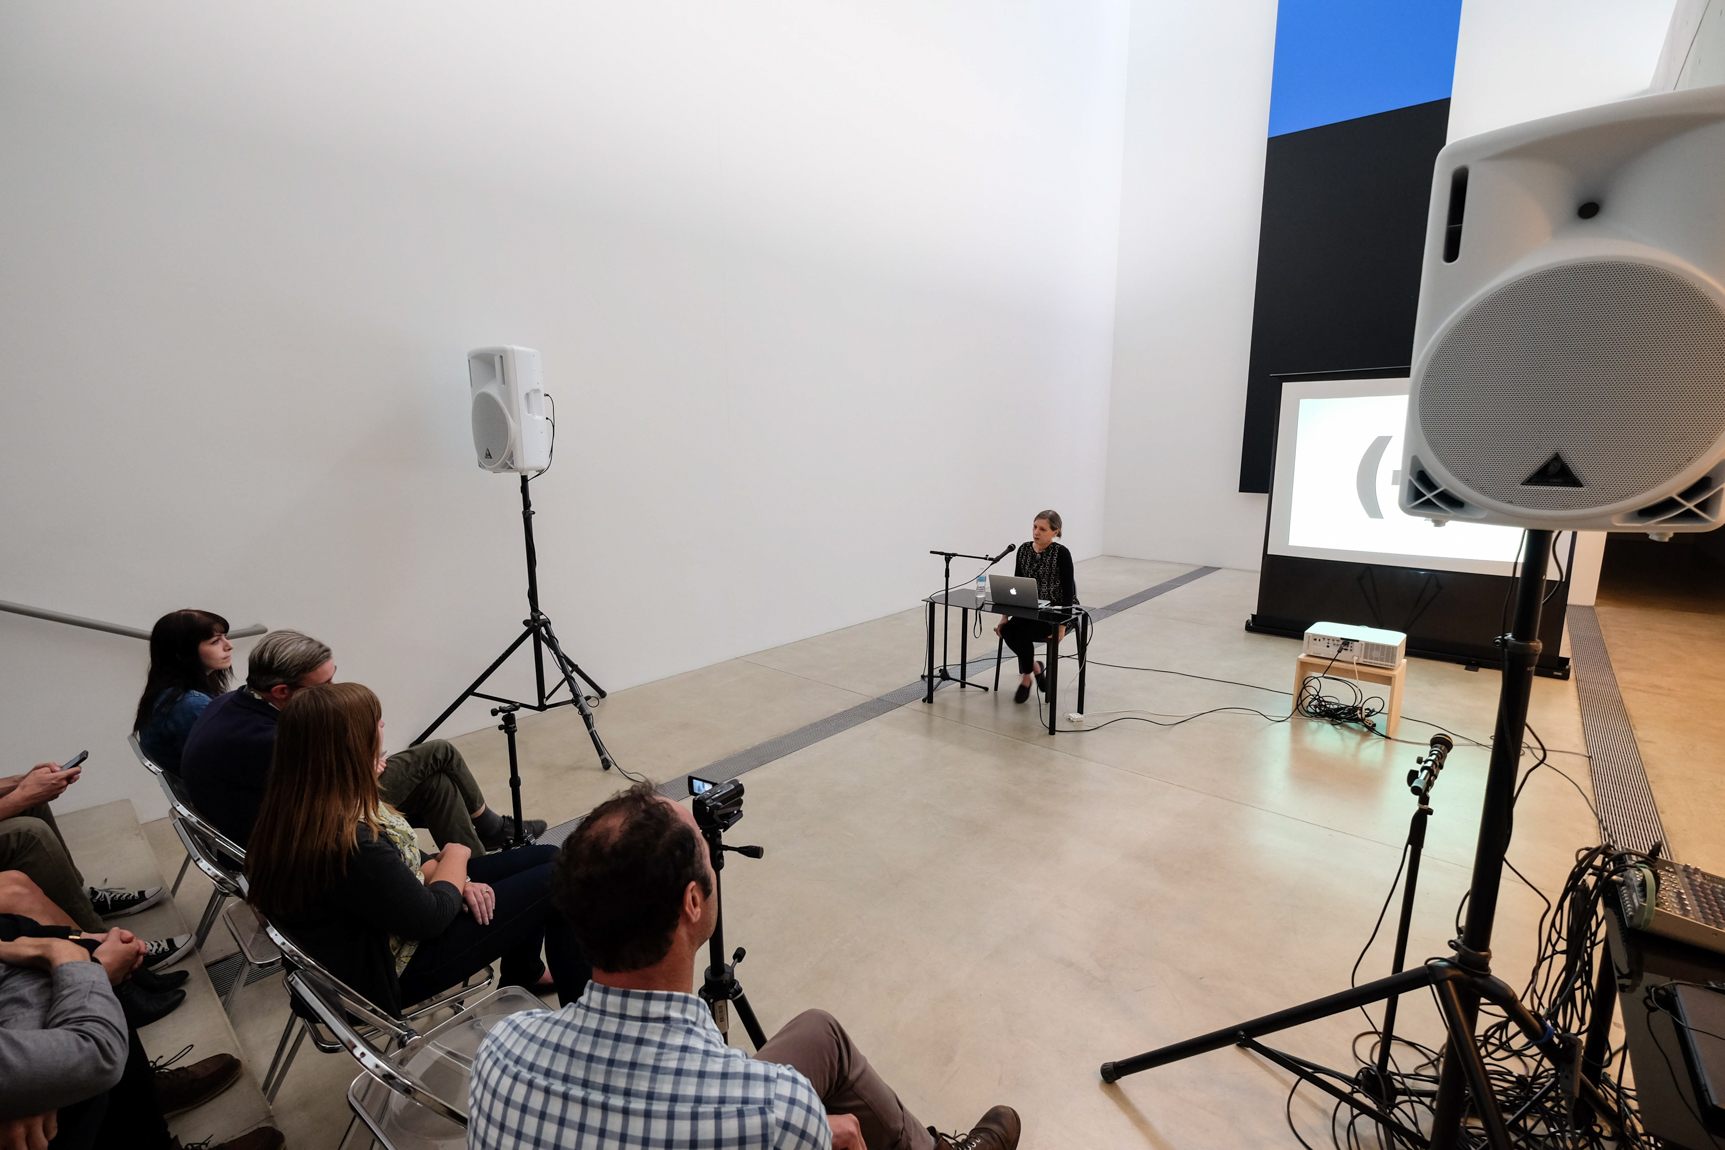 Keller Easterling gives a presentation to an audience in front of Kelly's "Blue Black," with a projection screen. Easterling is seated behind a table with a microphone.